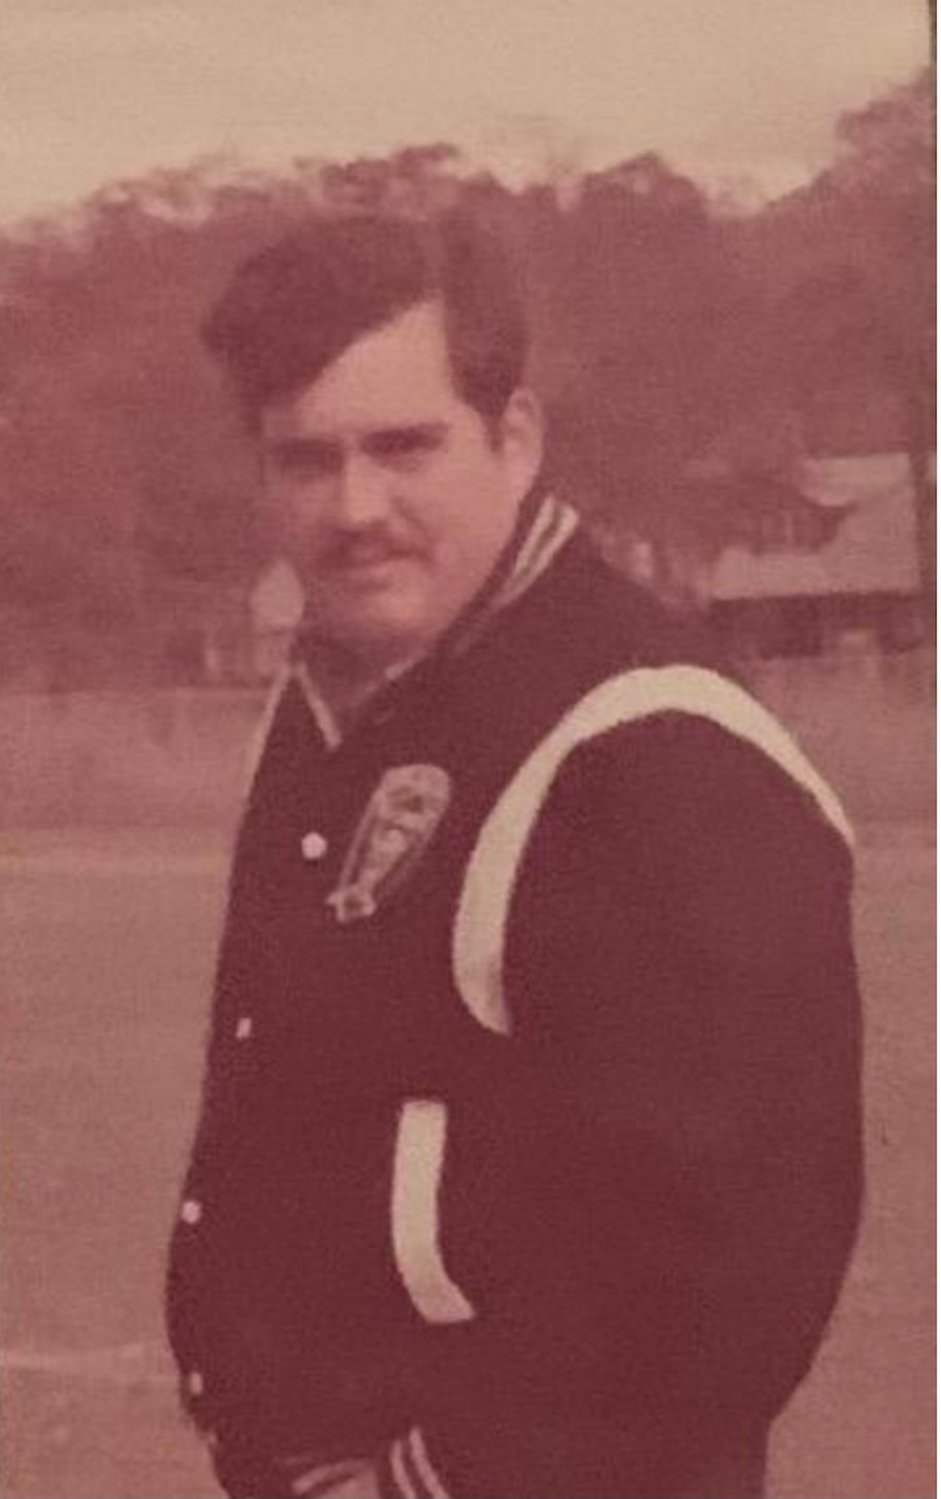 Longtime East Rockaway Recreation Director Jerry Chapel died Jan. 3. Among his many    community endeavors, he co-founded the East Rockaway Raiders football team in 1971.